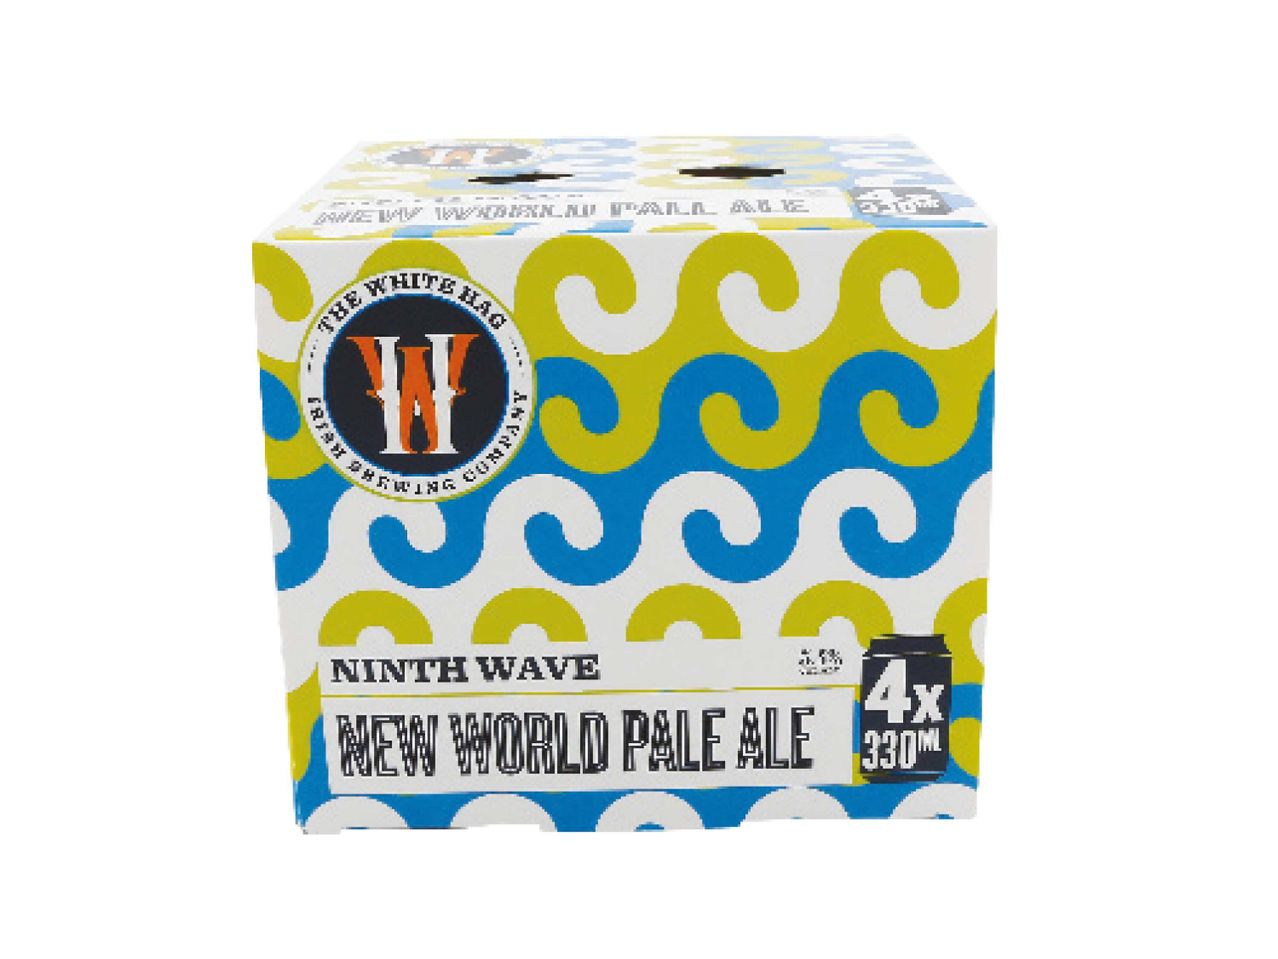 Go to full screen view: Ninth Wave New World Pale Ale 5.4% - Image 1